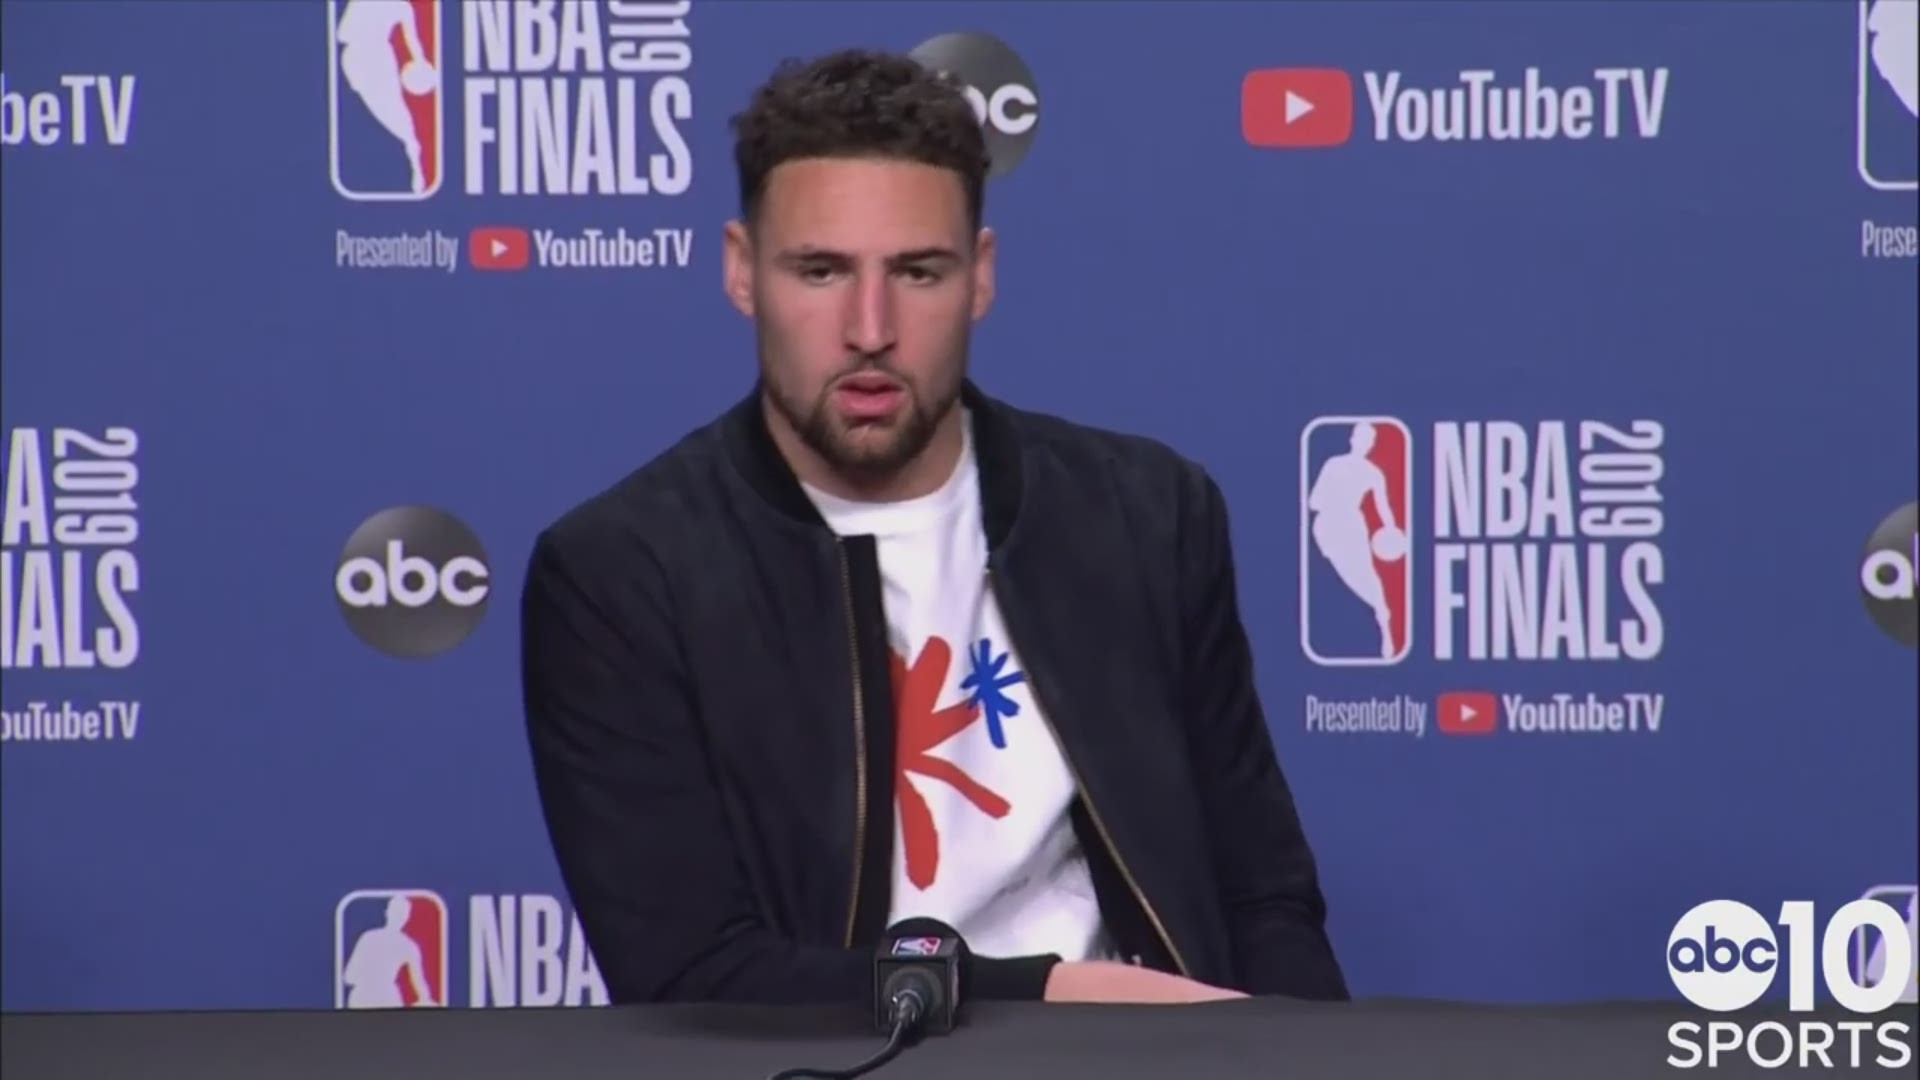 Warriors guard Klay Thompson says it's hard to enjoy Monday's 106-105 victory in Game 5 over the Raptors to force a Game 6 in Oakland on Thursday, trailing Toronto 3-2 in the NBA Finals because of losing teammate Kevin Durant to an Achilles injury.